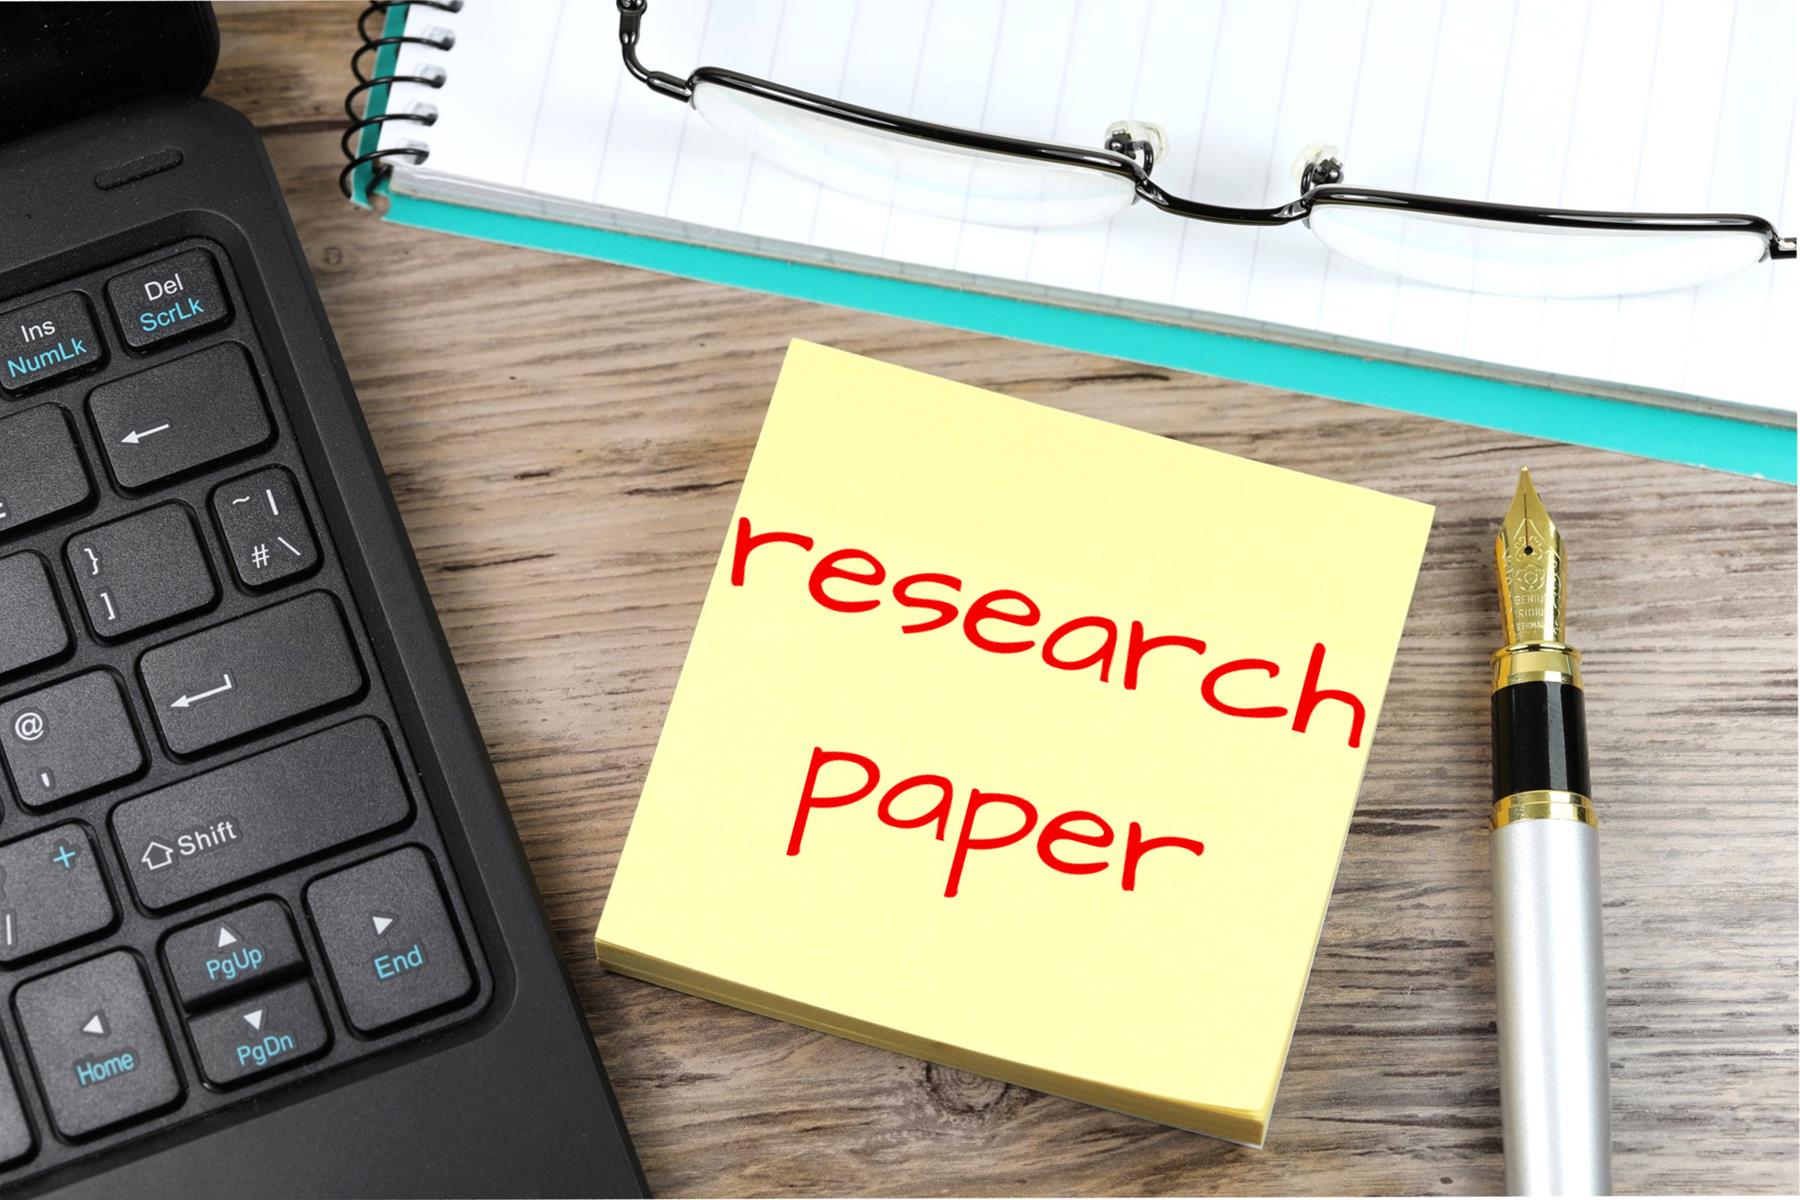 Research-Paper